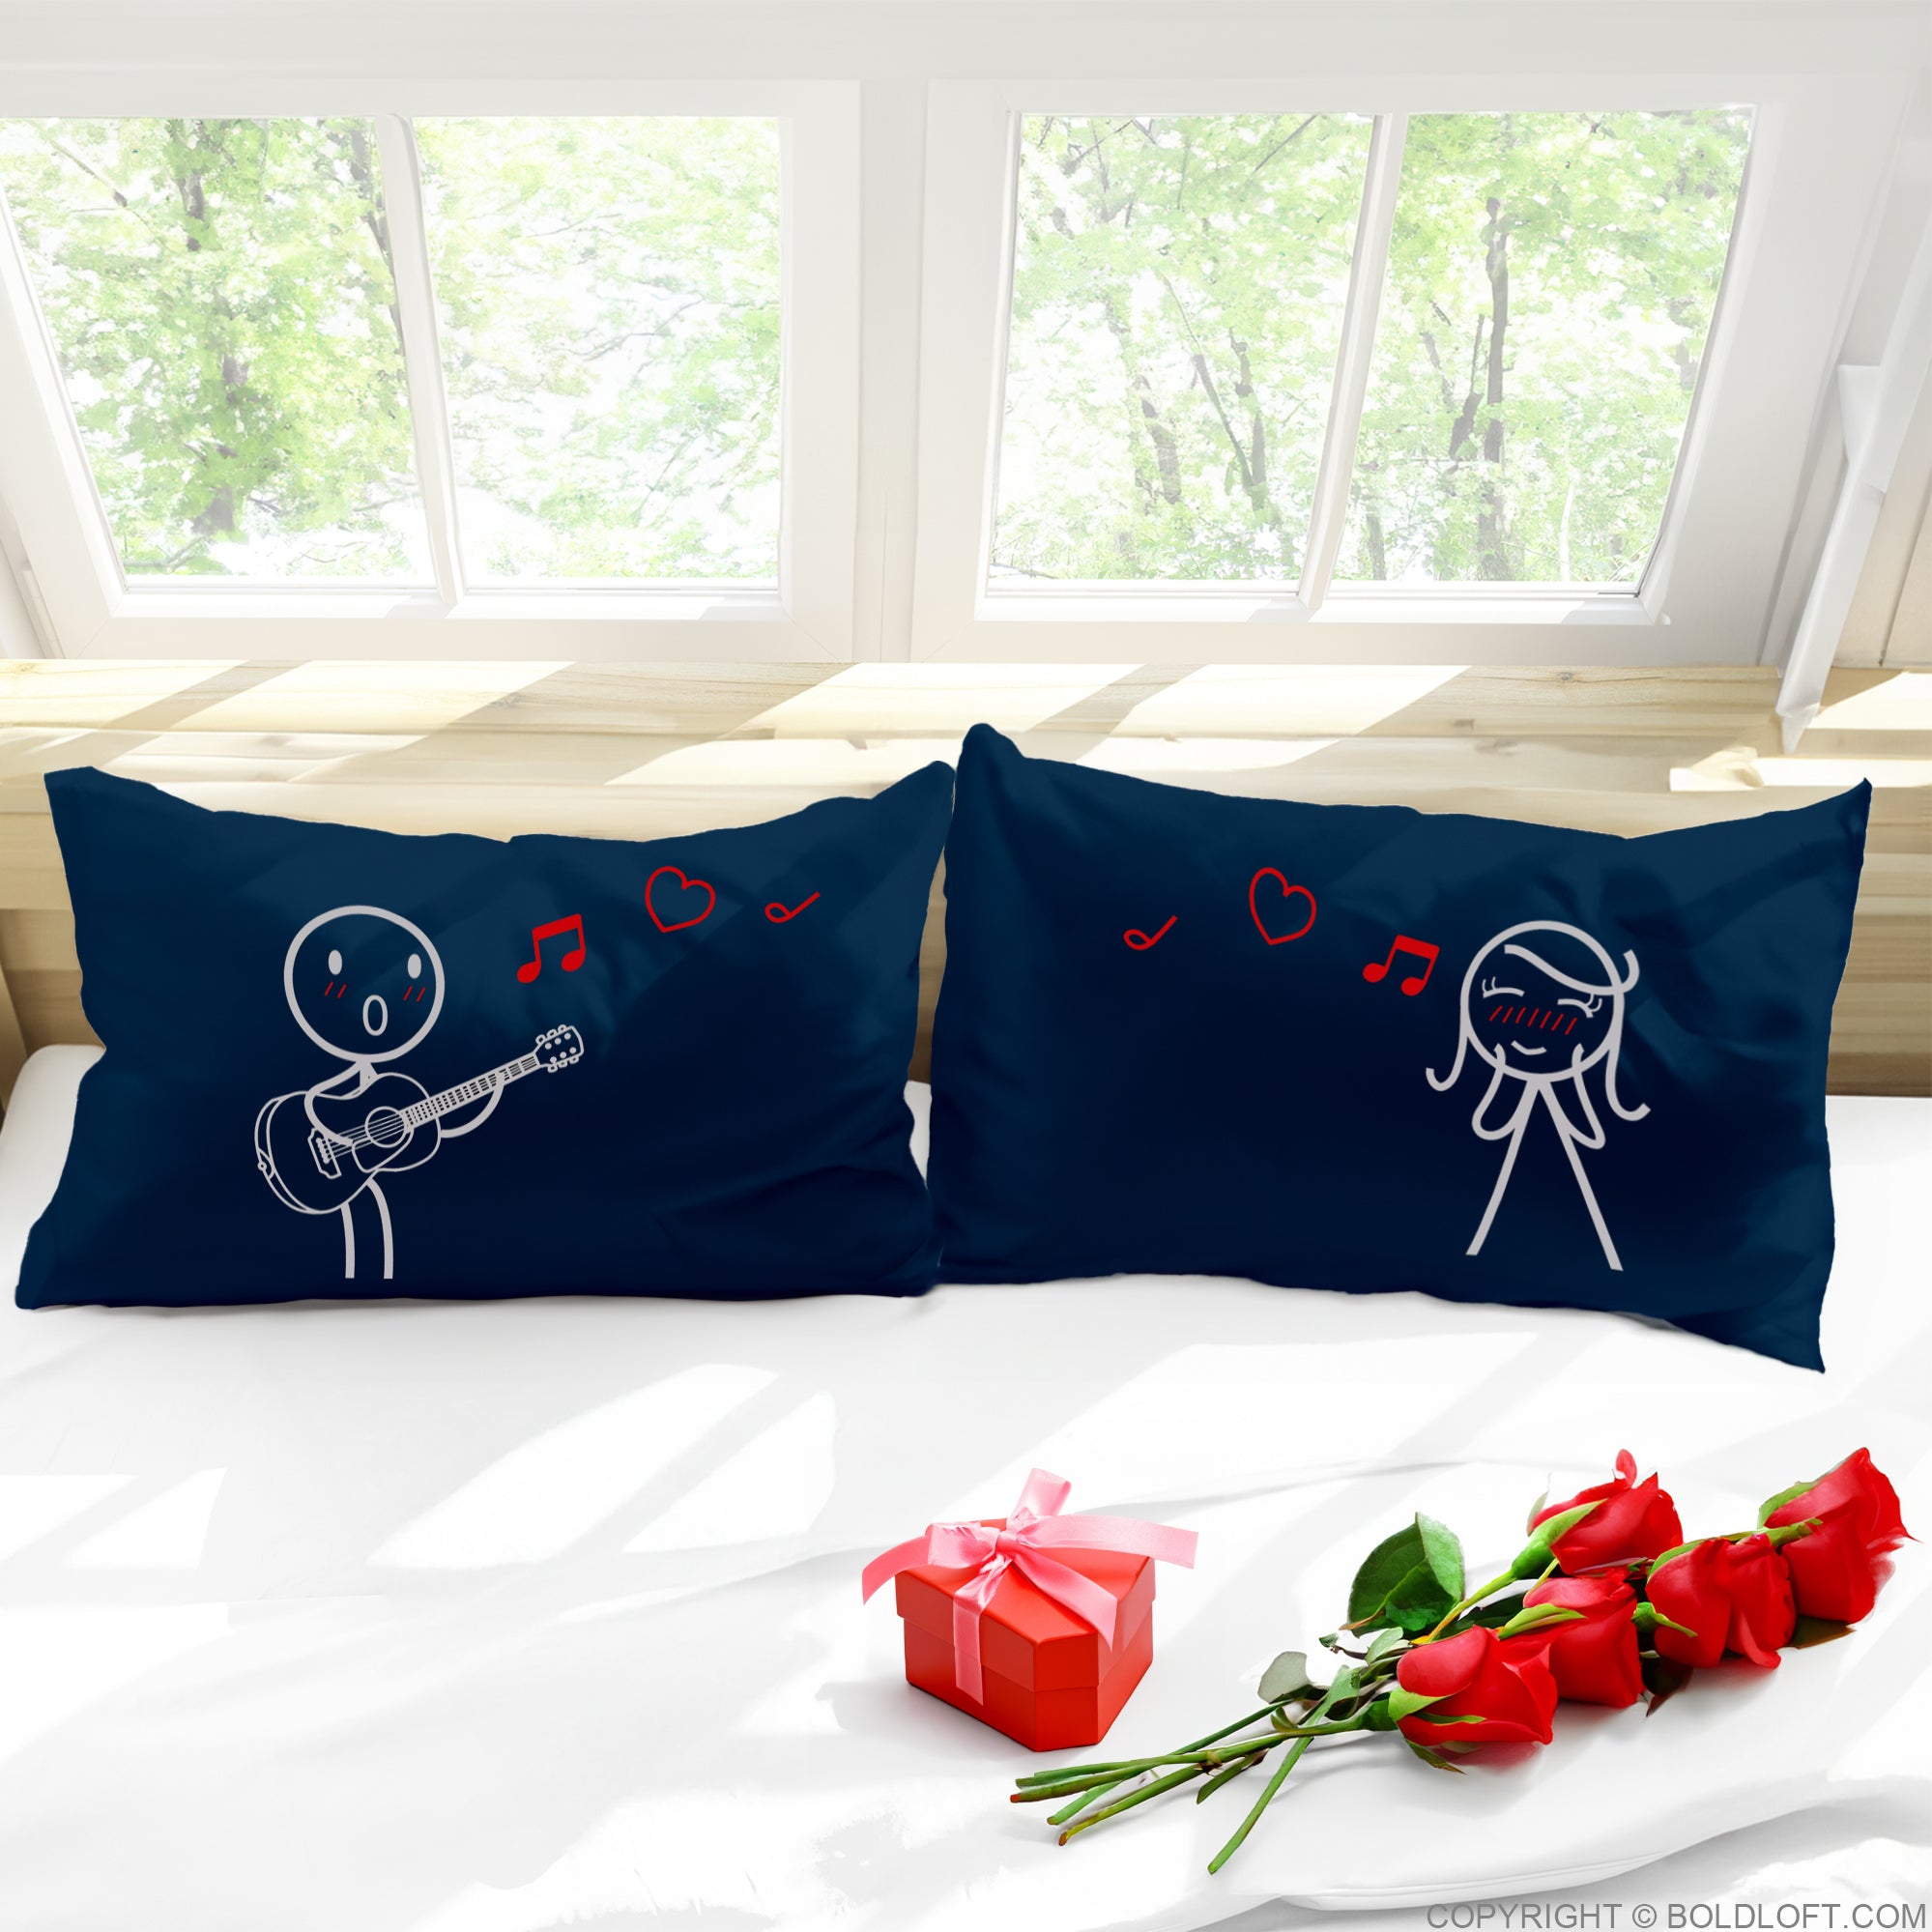 BoldLoft Love Me Tender Couple Pillowcases in Dark Blue feature a set of his and hers pillowcases with guitar and heart-shaped notes